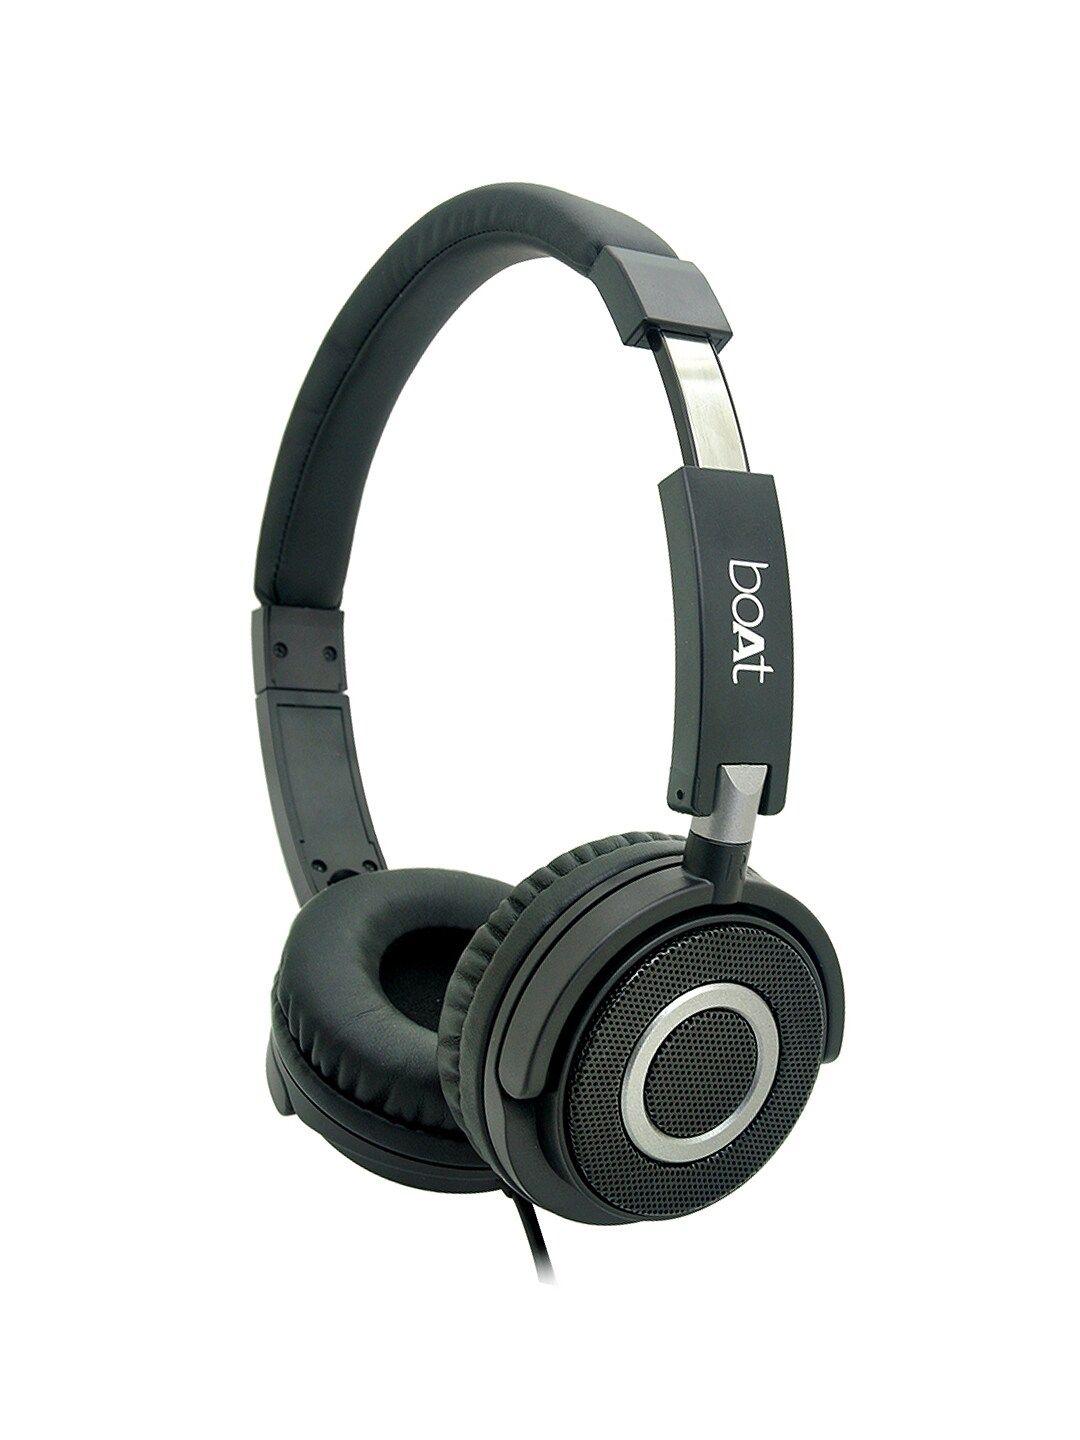 boat bassheads 900 black wired headset with enhanced bass & lightweight foldable design